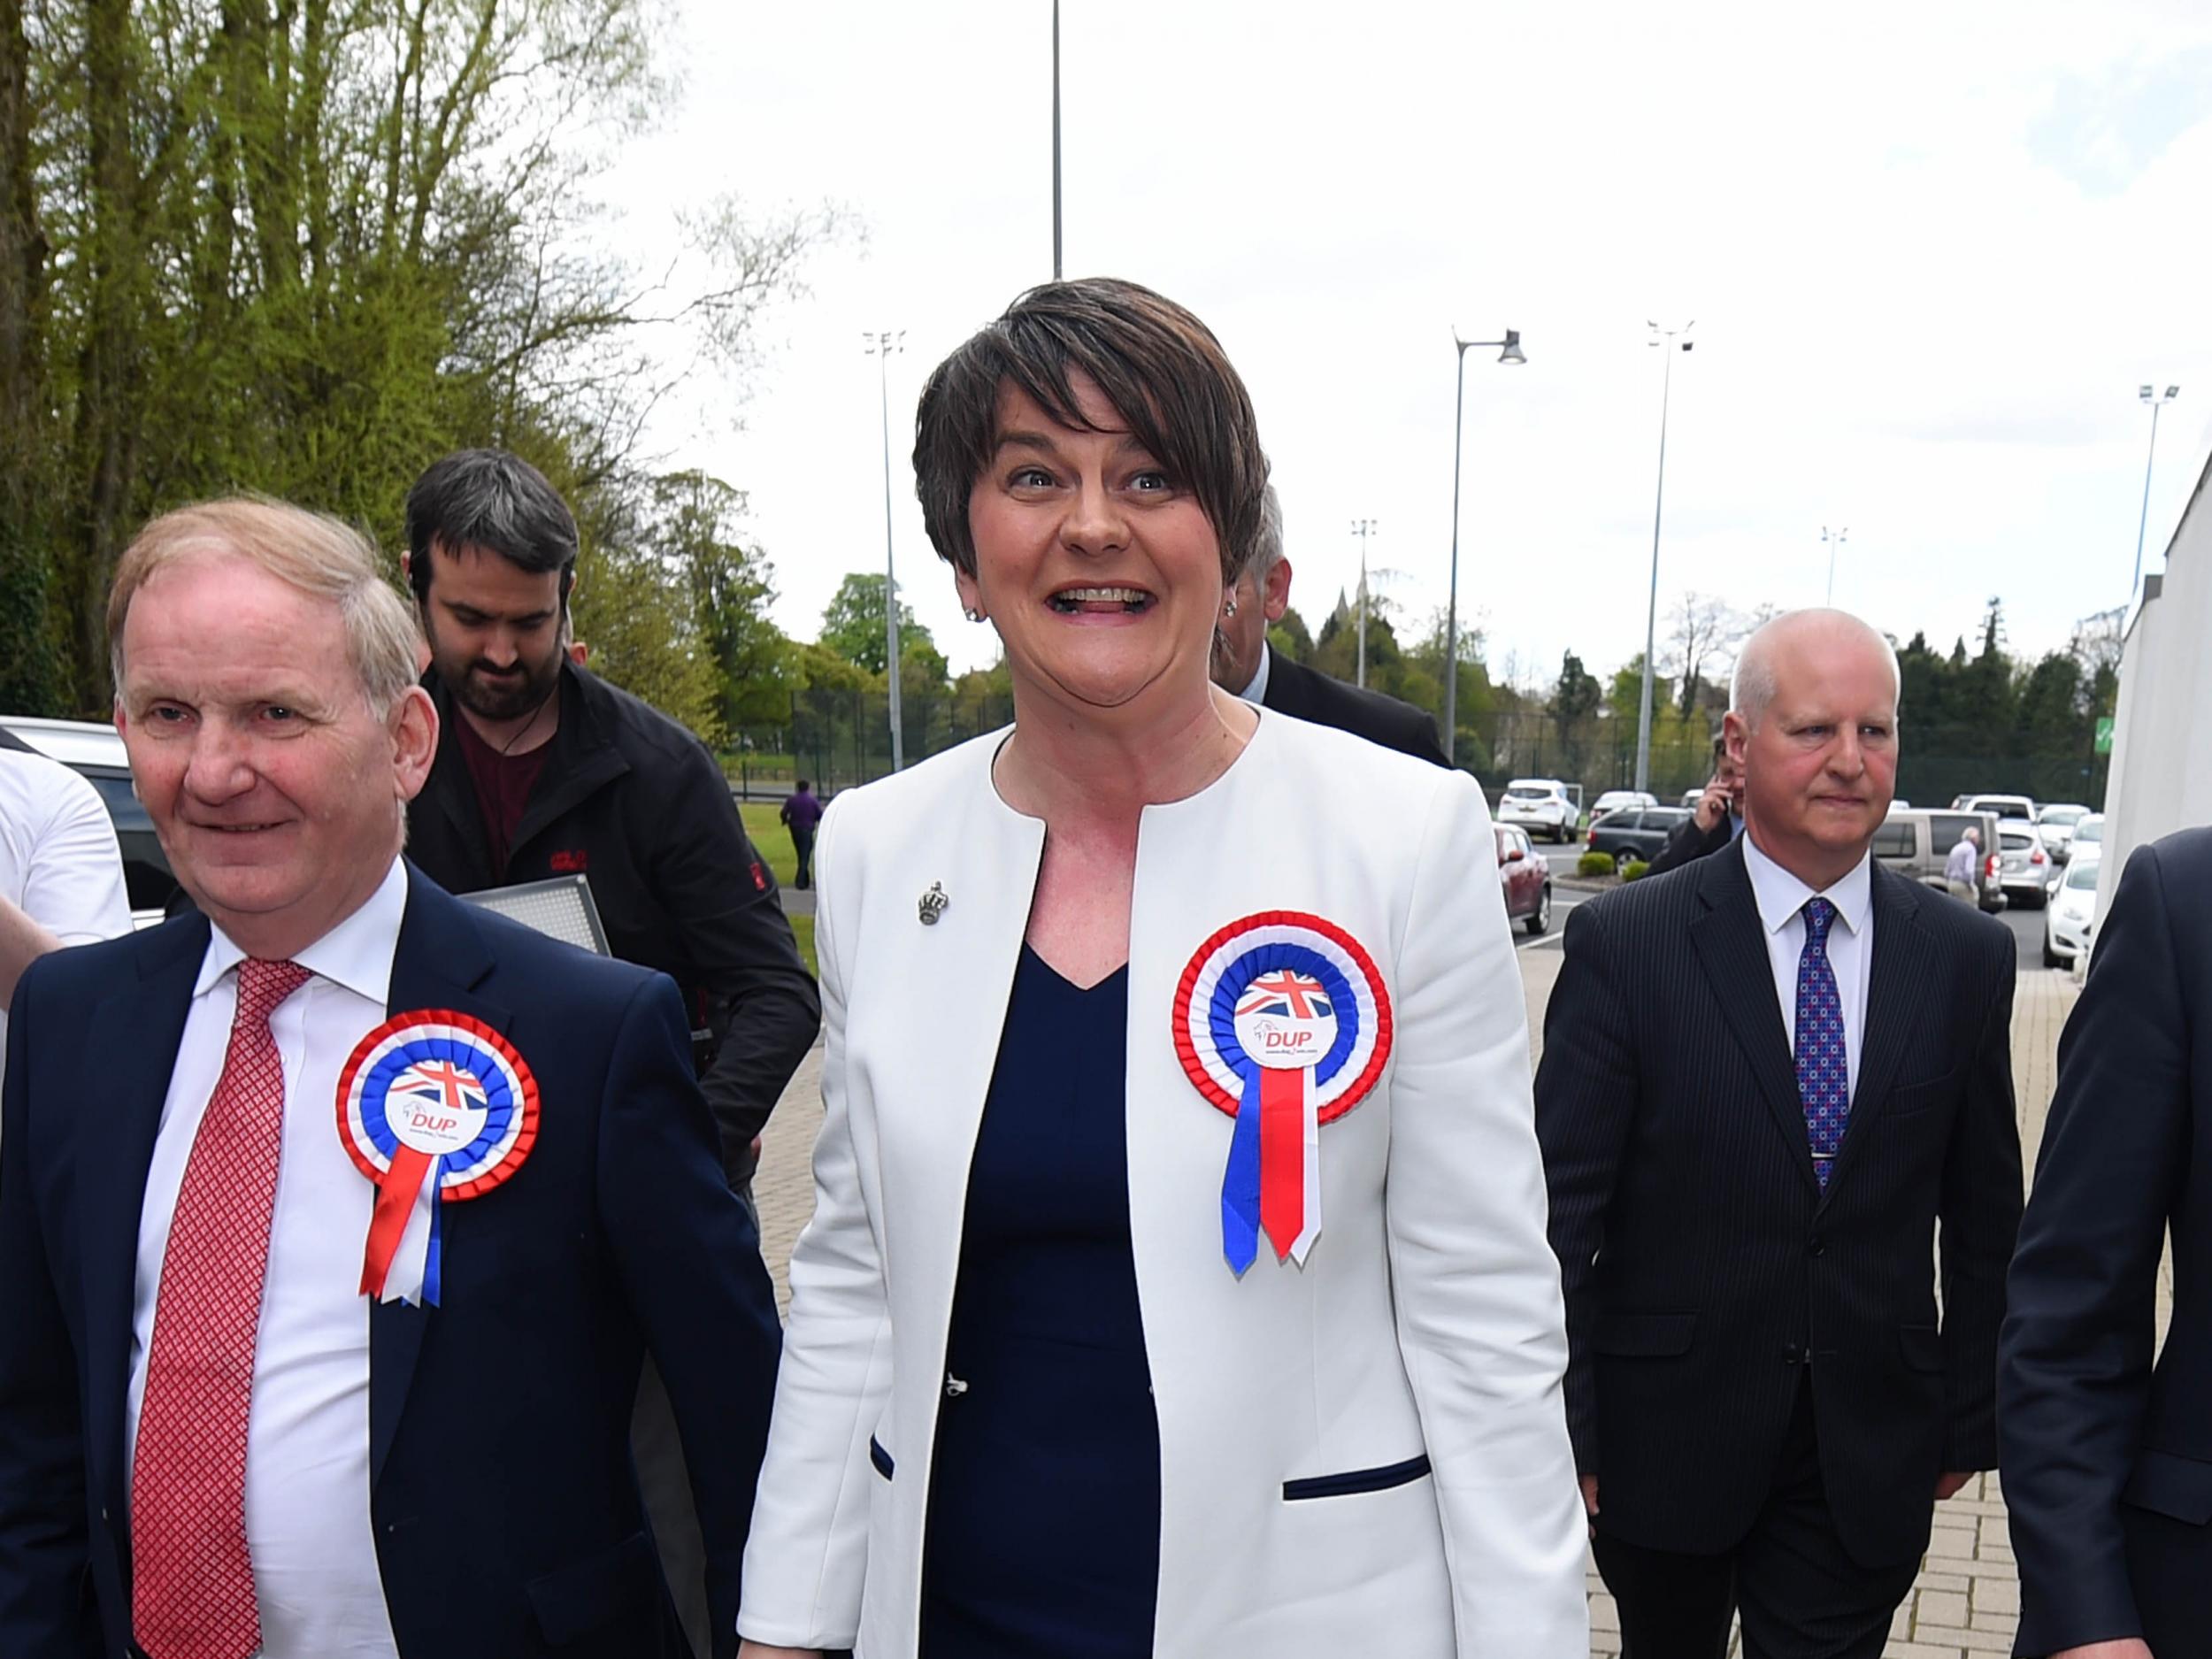 DUP leader Arlene Foster is welcomed by party members as she arrives at the Northern Ireland Assembly elections count